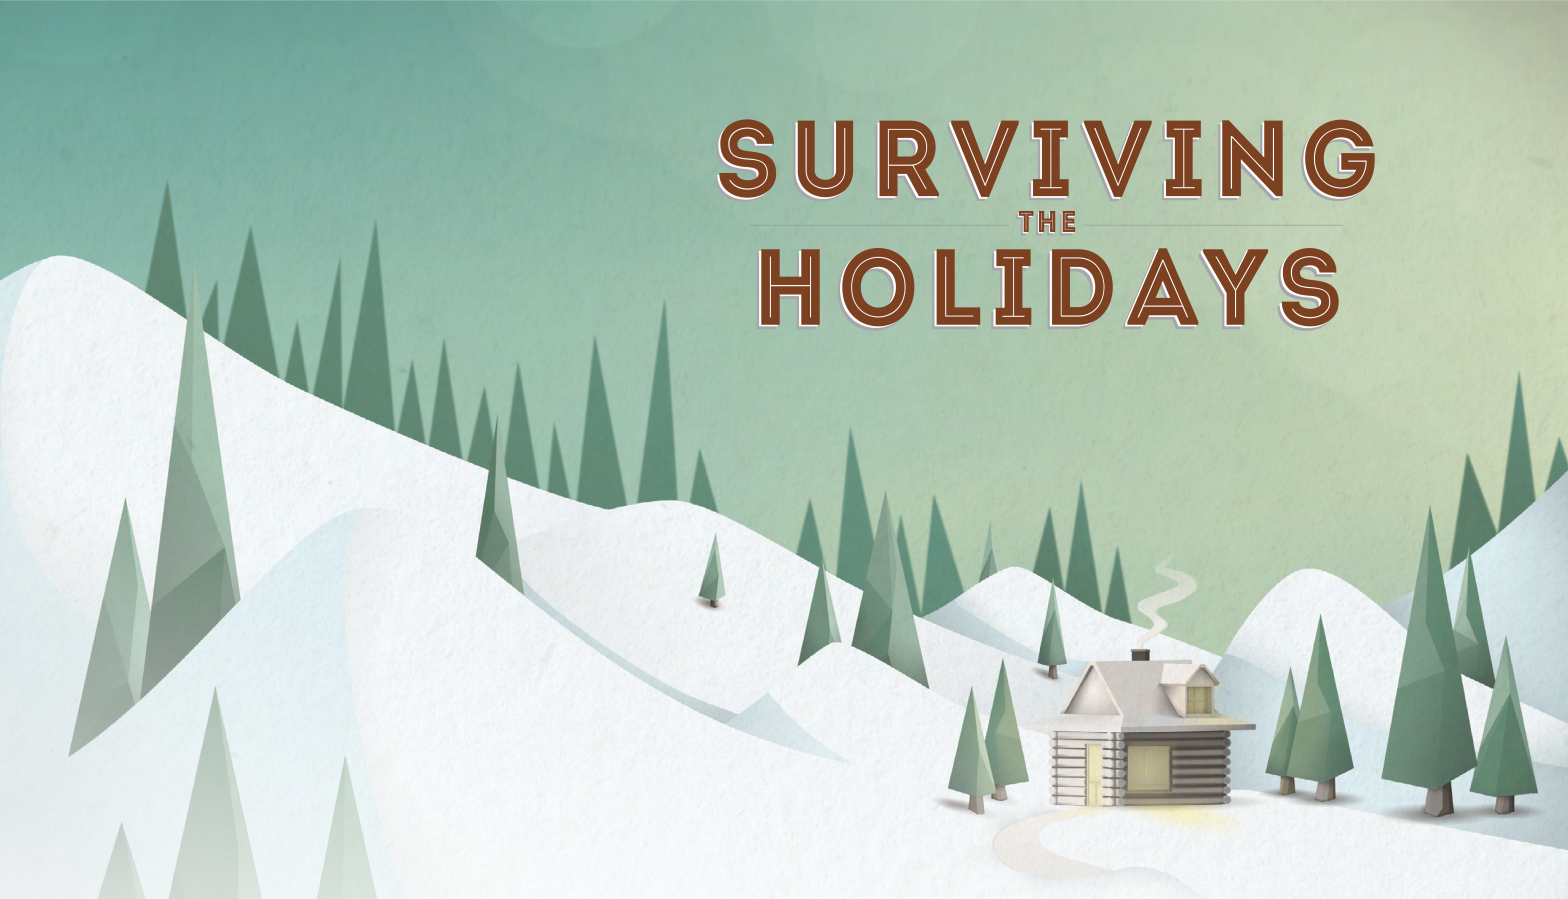 Surviving the Holidays